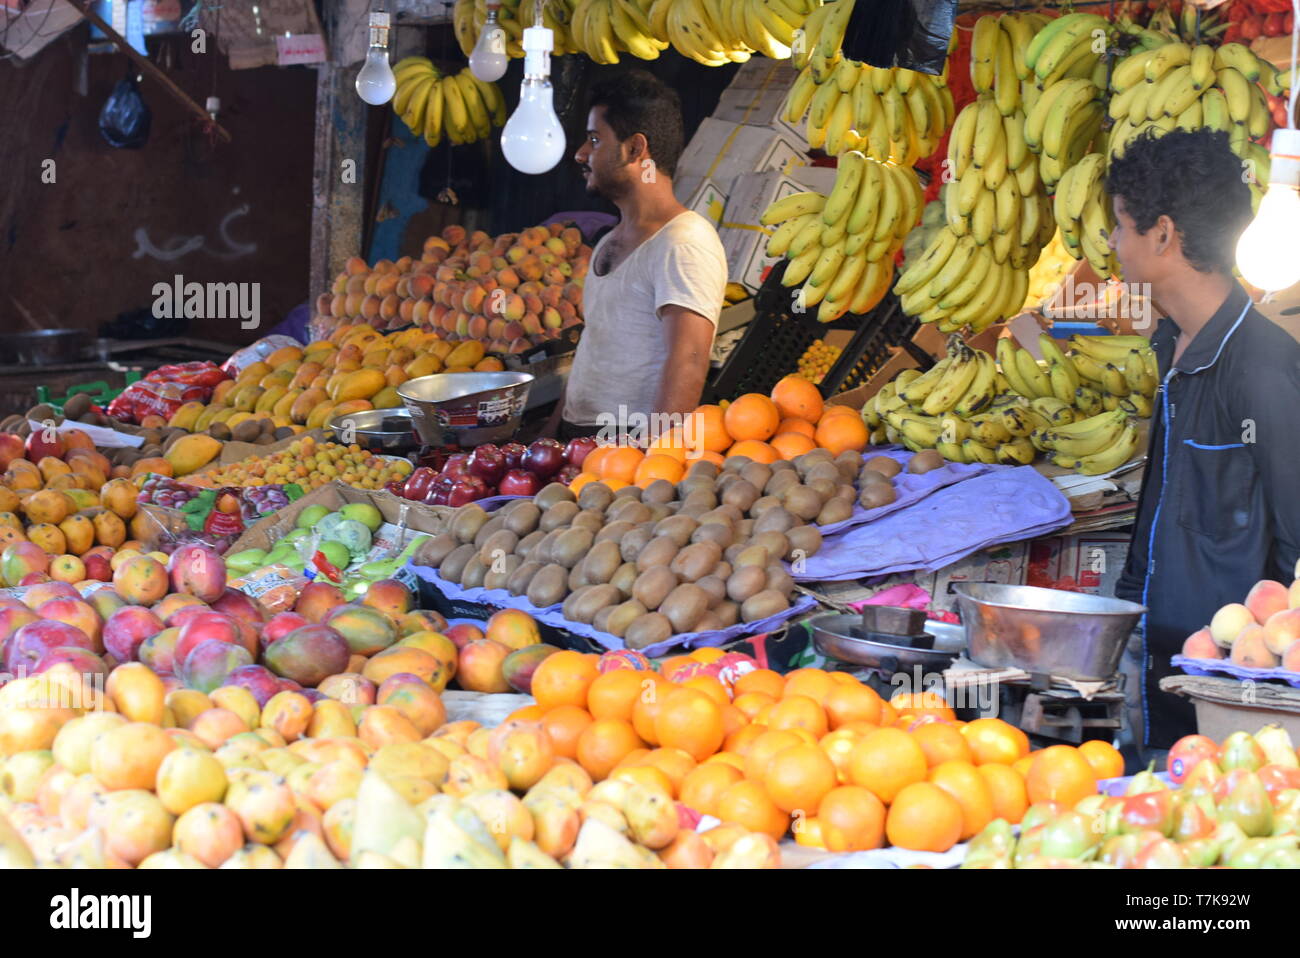 (190507) -- ADEN, May 7, 2019 (Xinhua) -- Yemeni vendors wait for customers at a market in the southern port city of Aden, Yemen, on May 7, 2019. People in the war-ridden Yemen complained about soaring prices of vegetables, fruits and other essentials as Ramadan began, a holy month during which Muslims worldwide abstain from eating and drinking from dawn to dusk. (Xinhua/Murad Abdo) Stock Photo